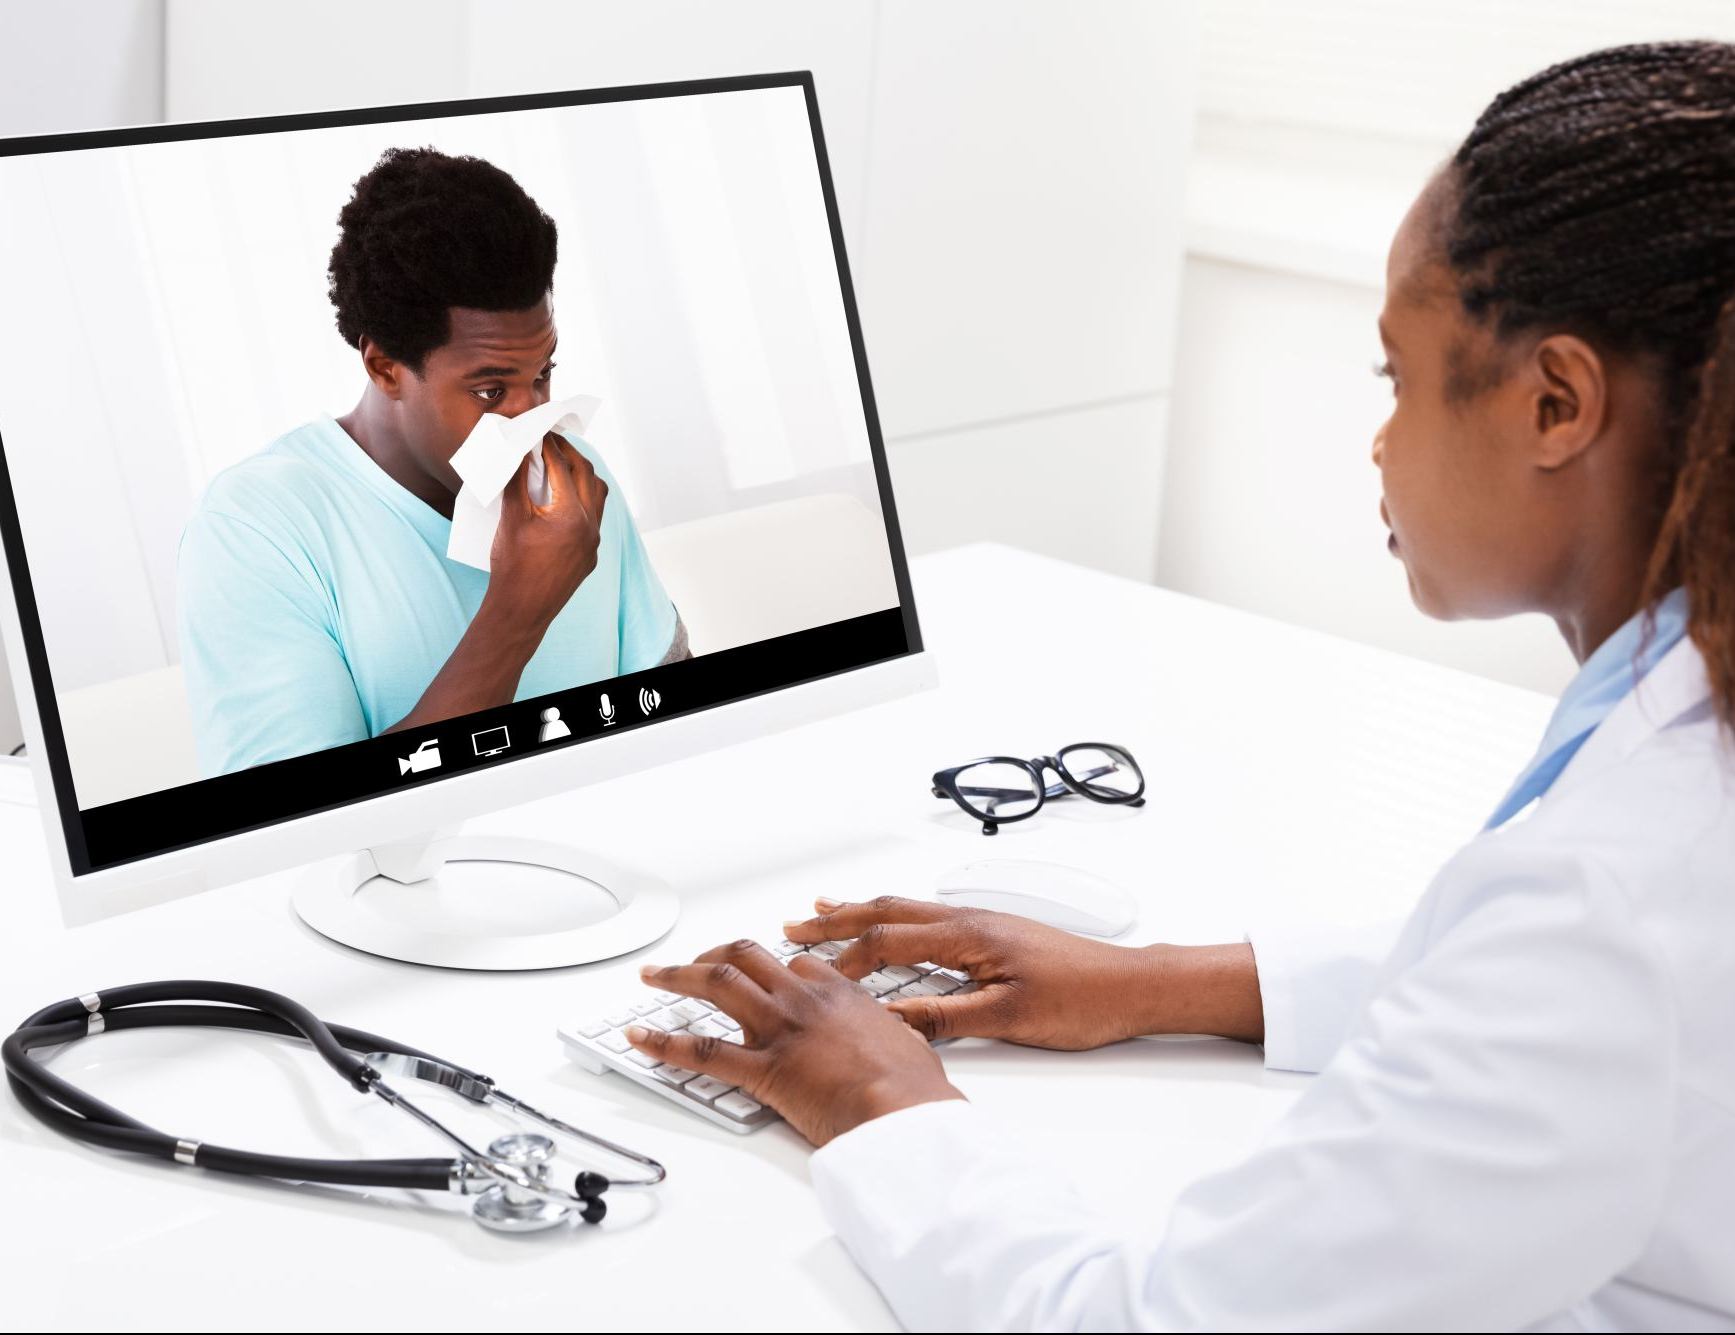 Patient with flu symptoms attends video clinic